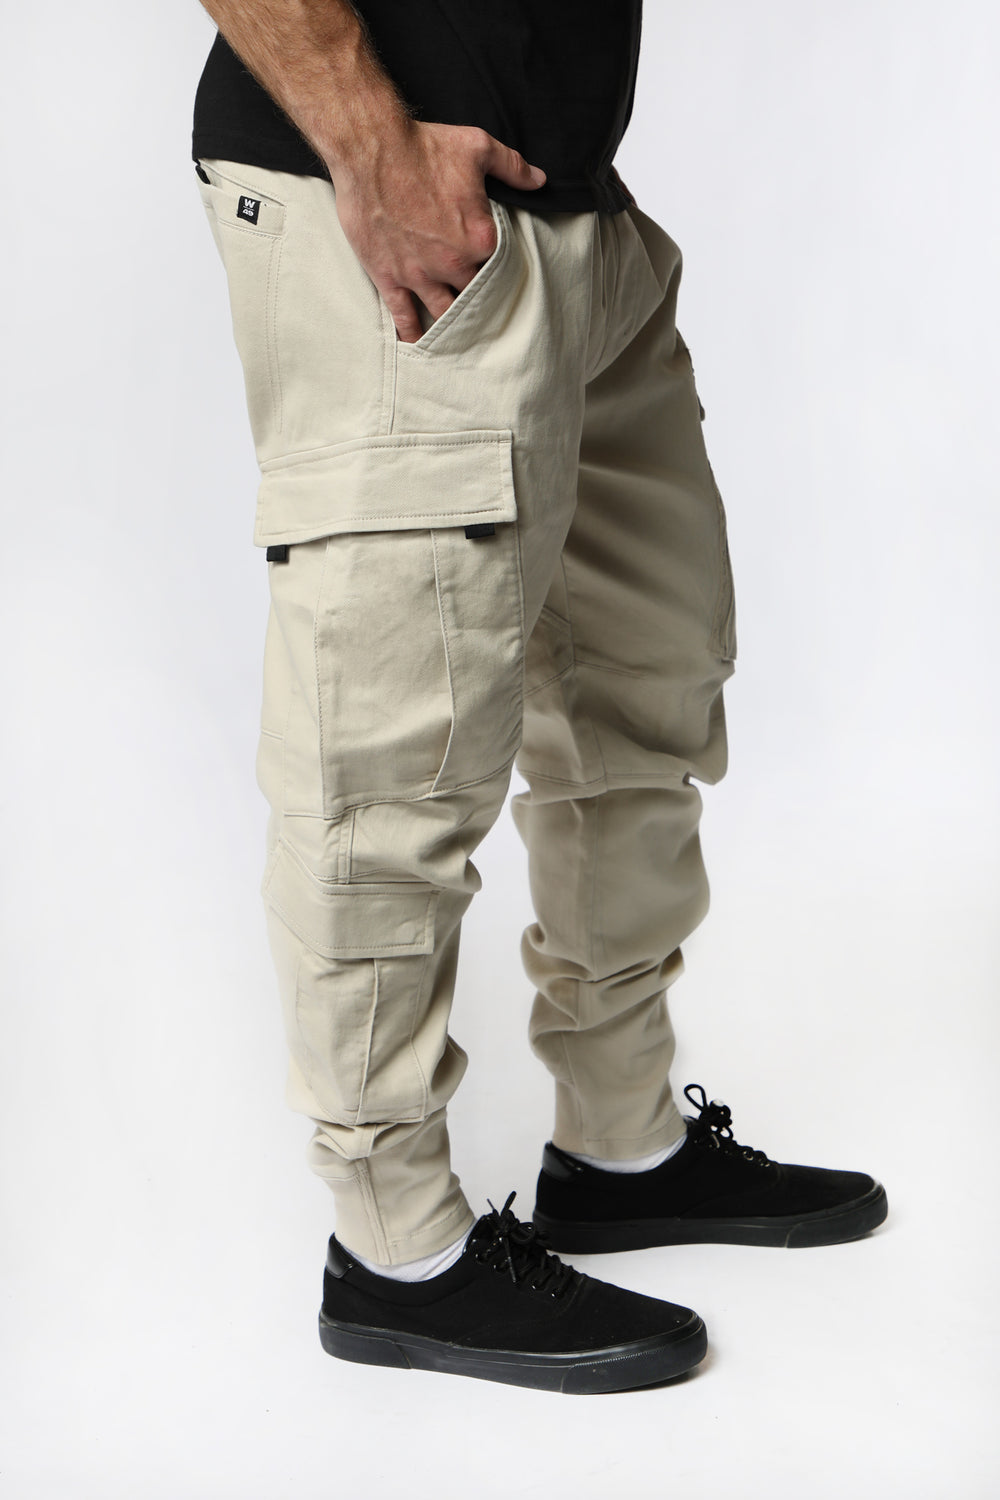 Zoo York Mens Soft Knit Cargo Jogger – West49